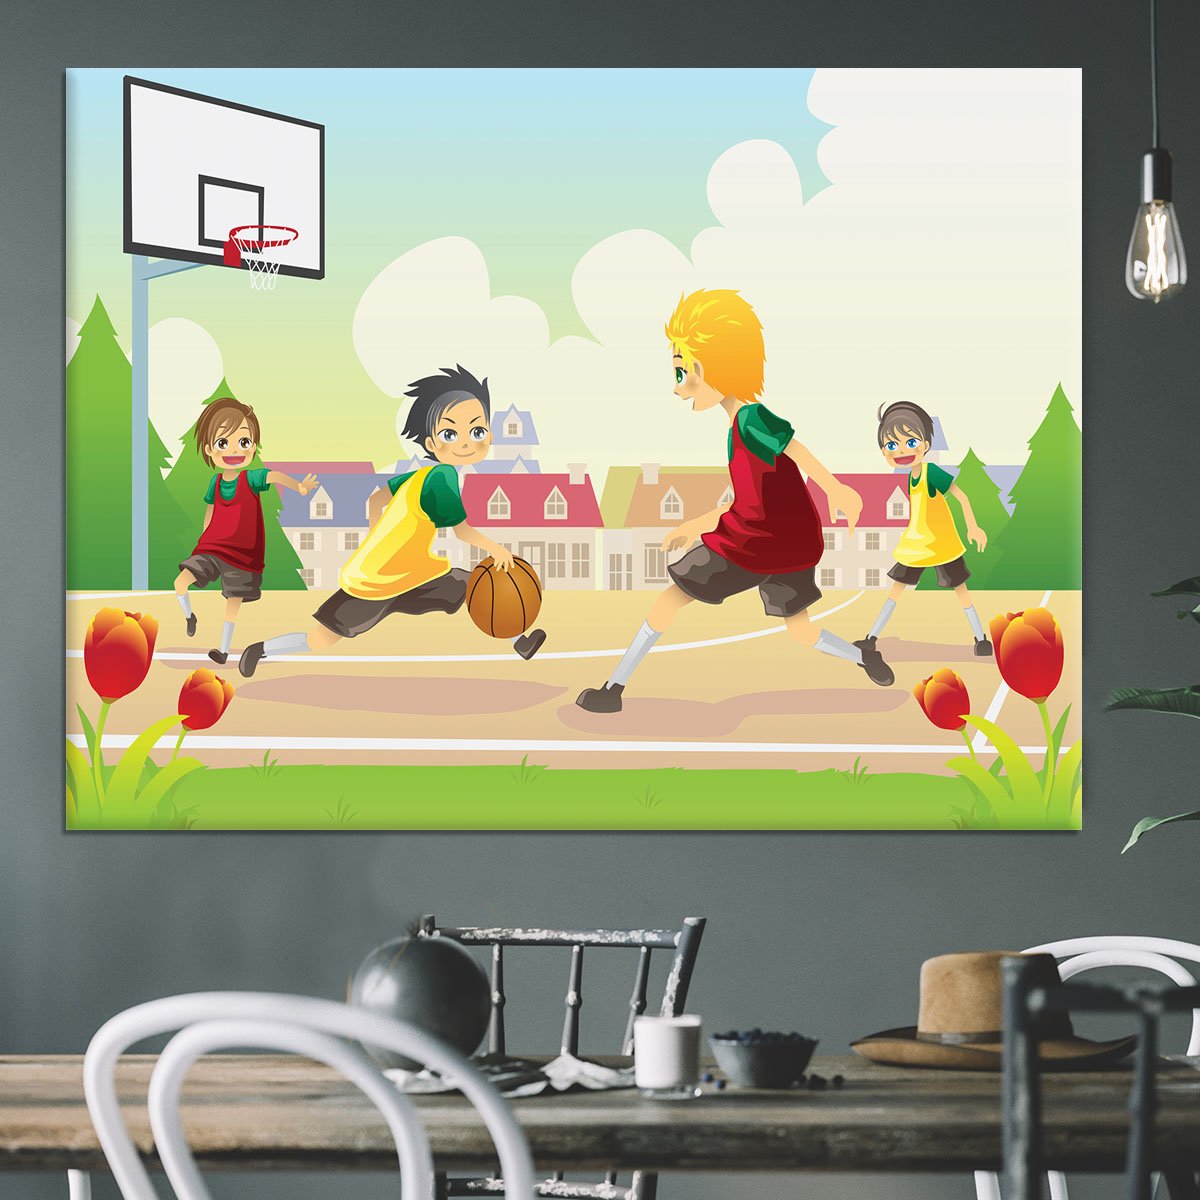 Kids playing basketball in the suburban area Canvas Print or Poster